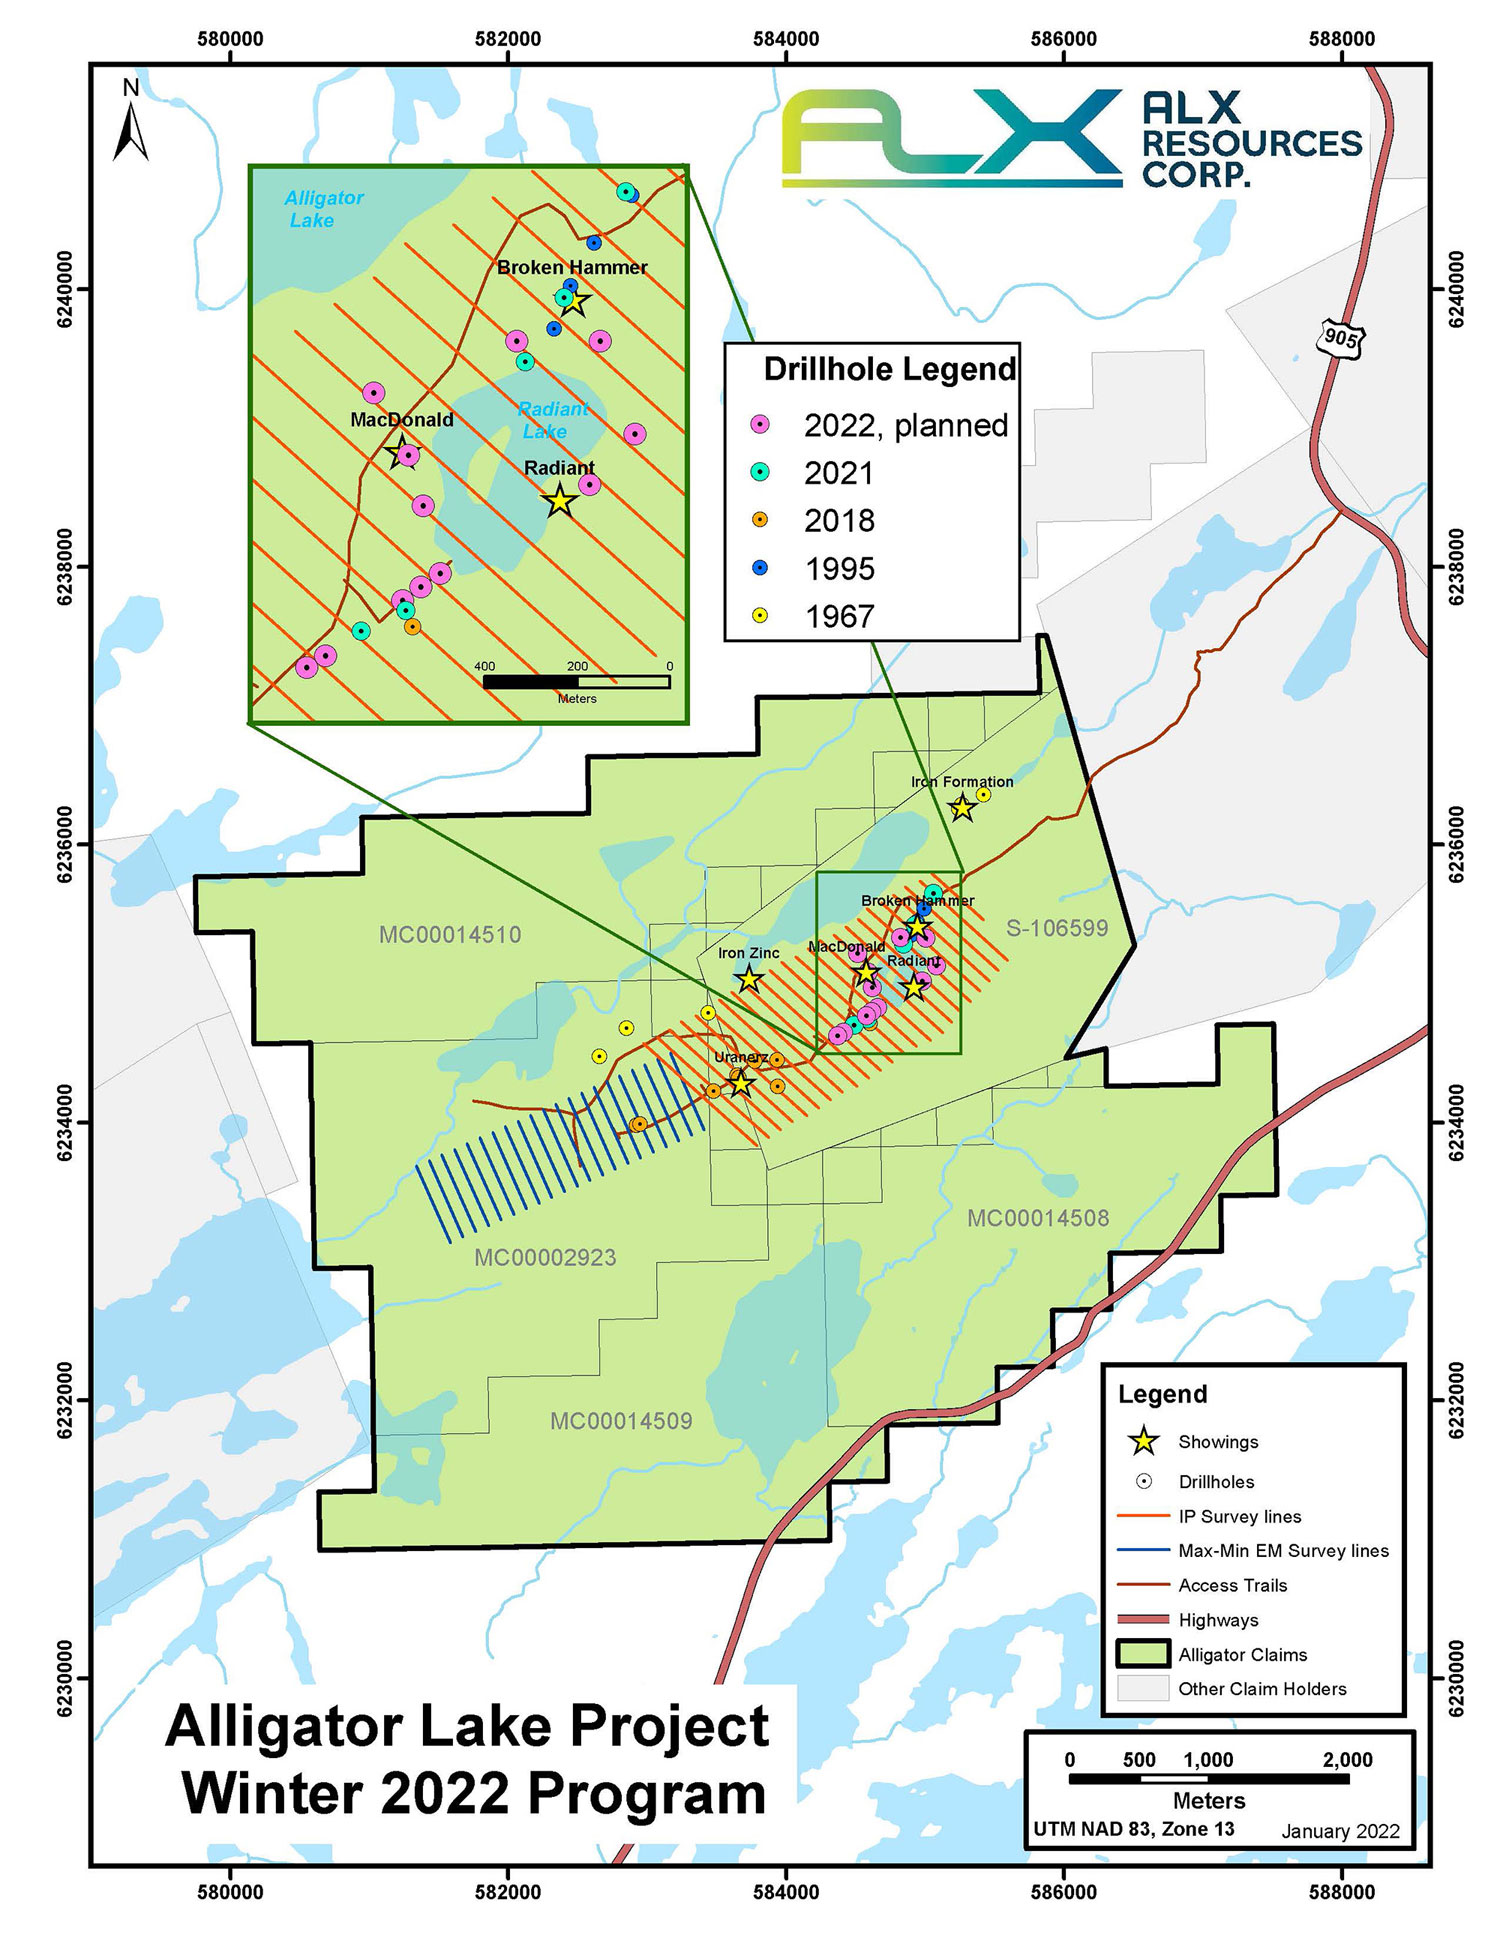 ALX’s 2022 Exploration Plan at the Alligator Lake Gold Project